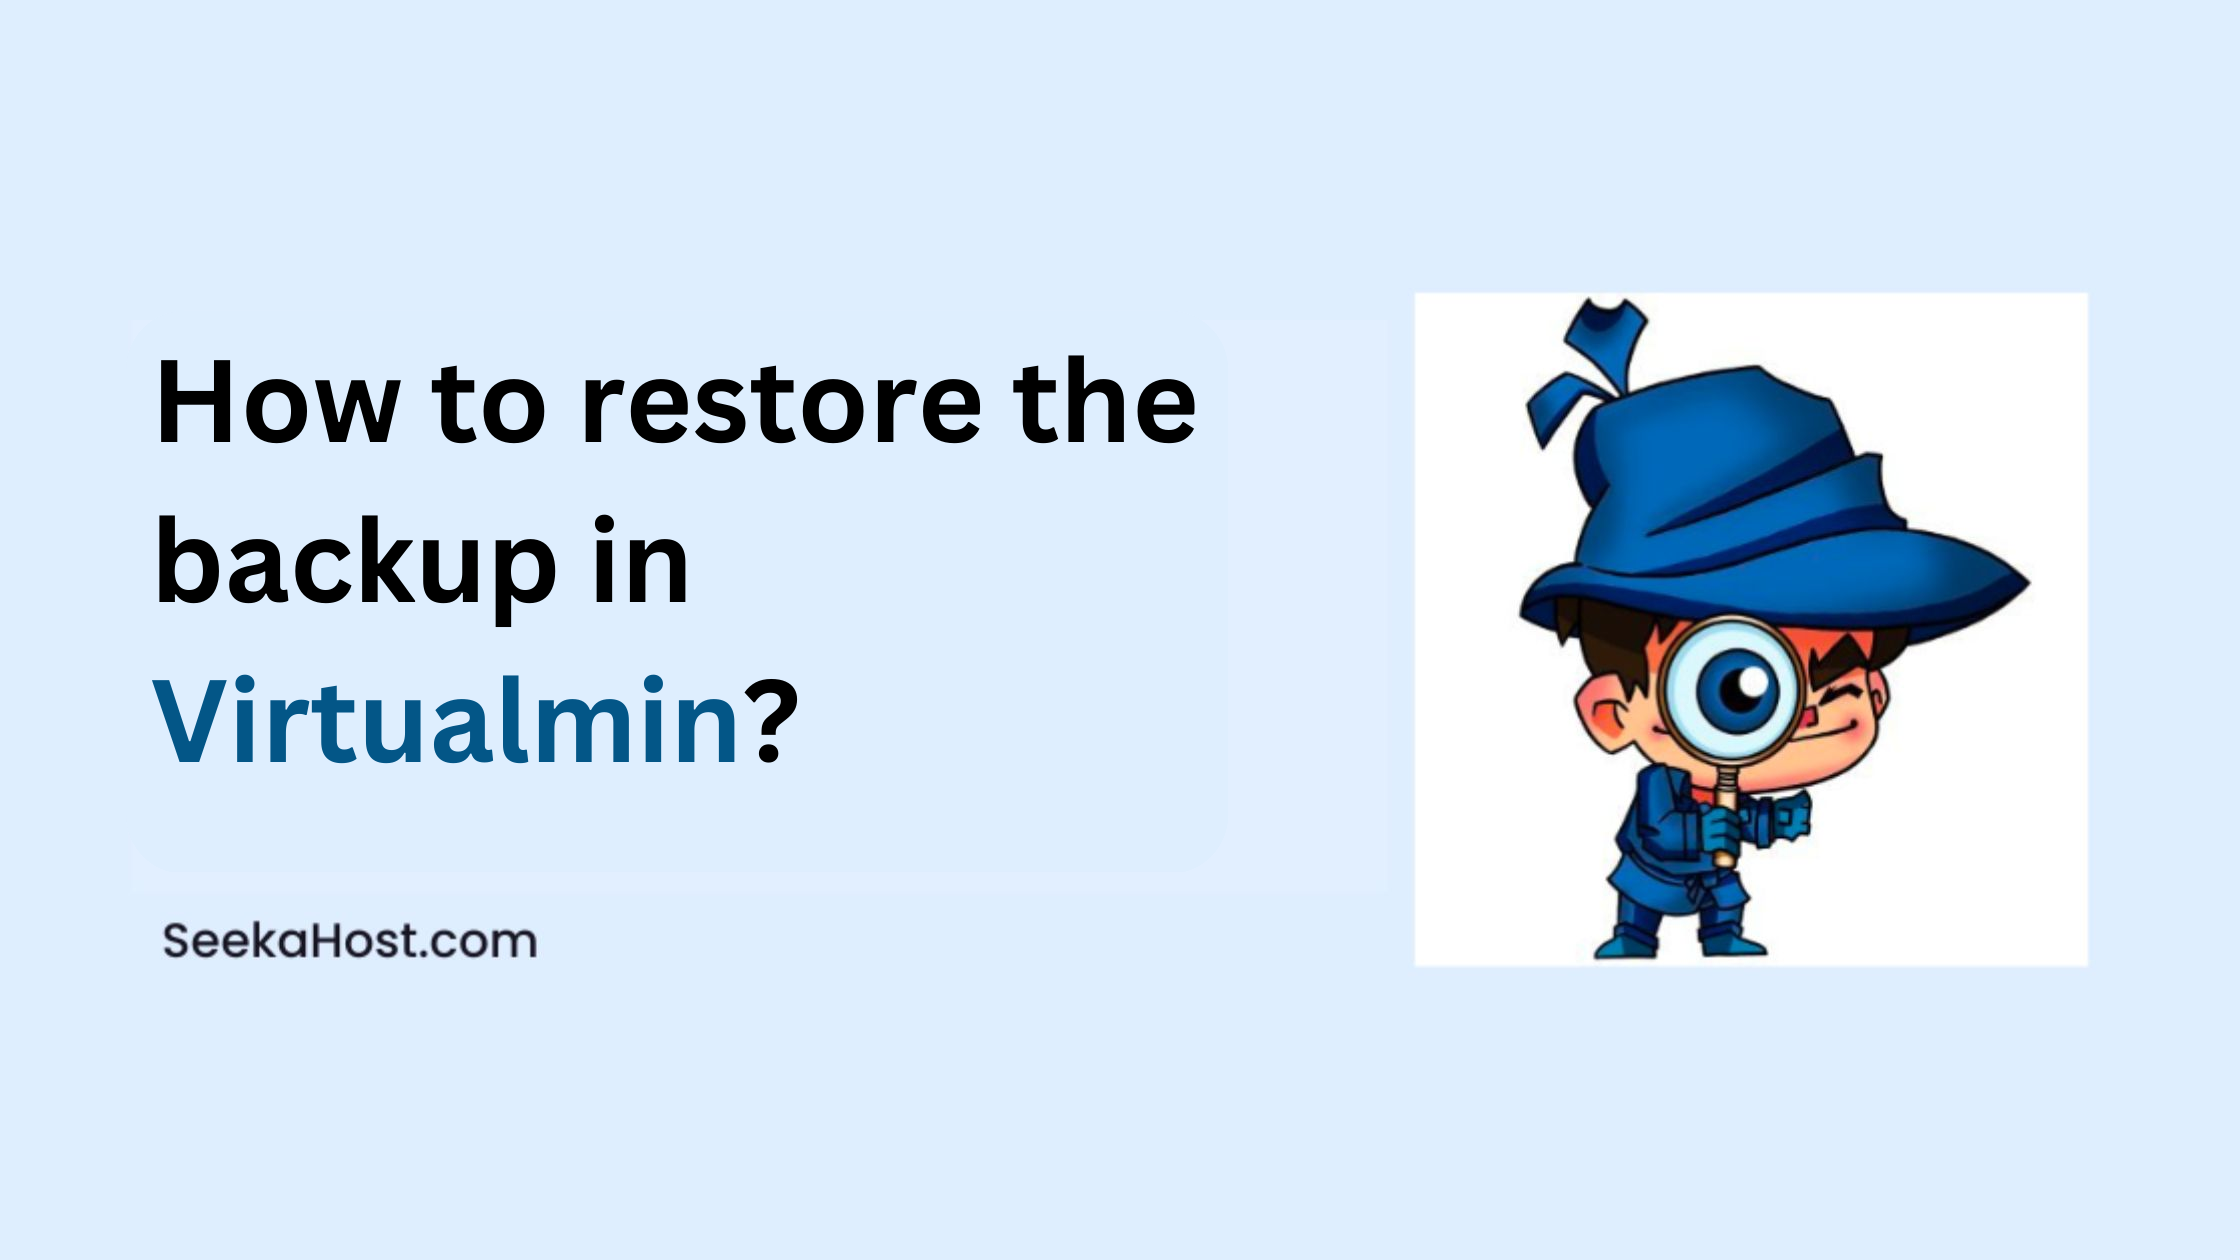 Backup and Restore in Virtualmin